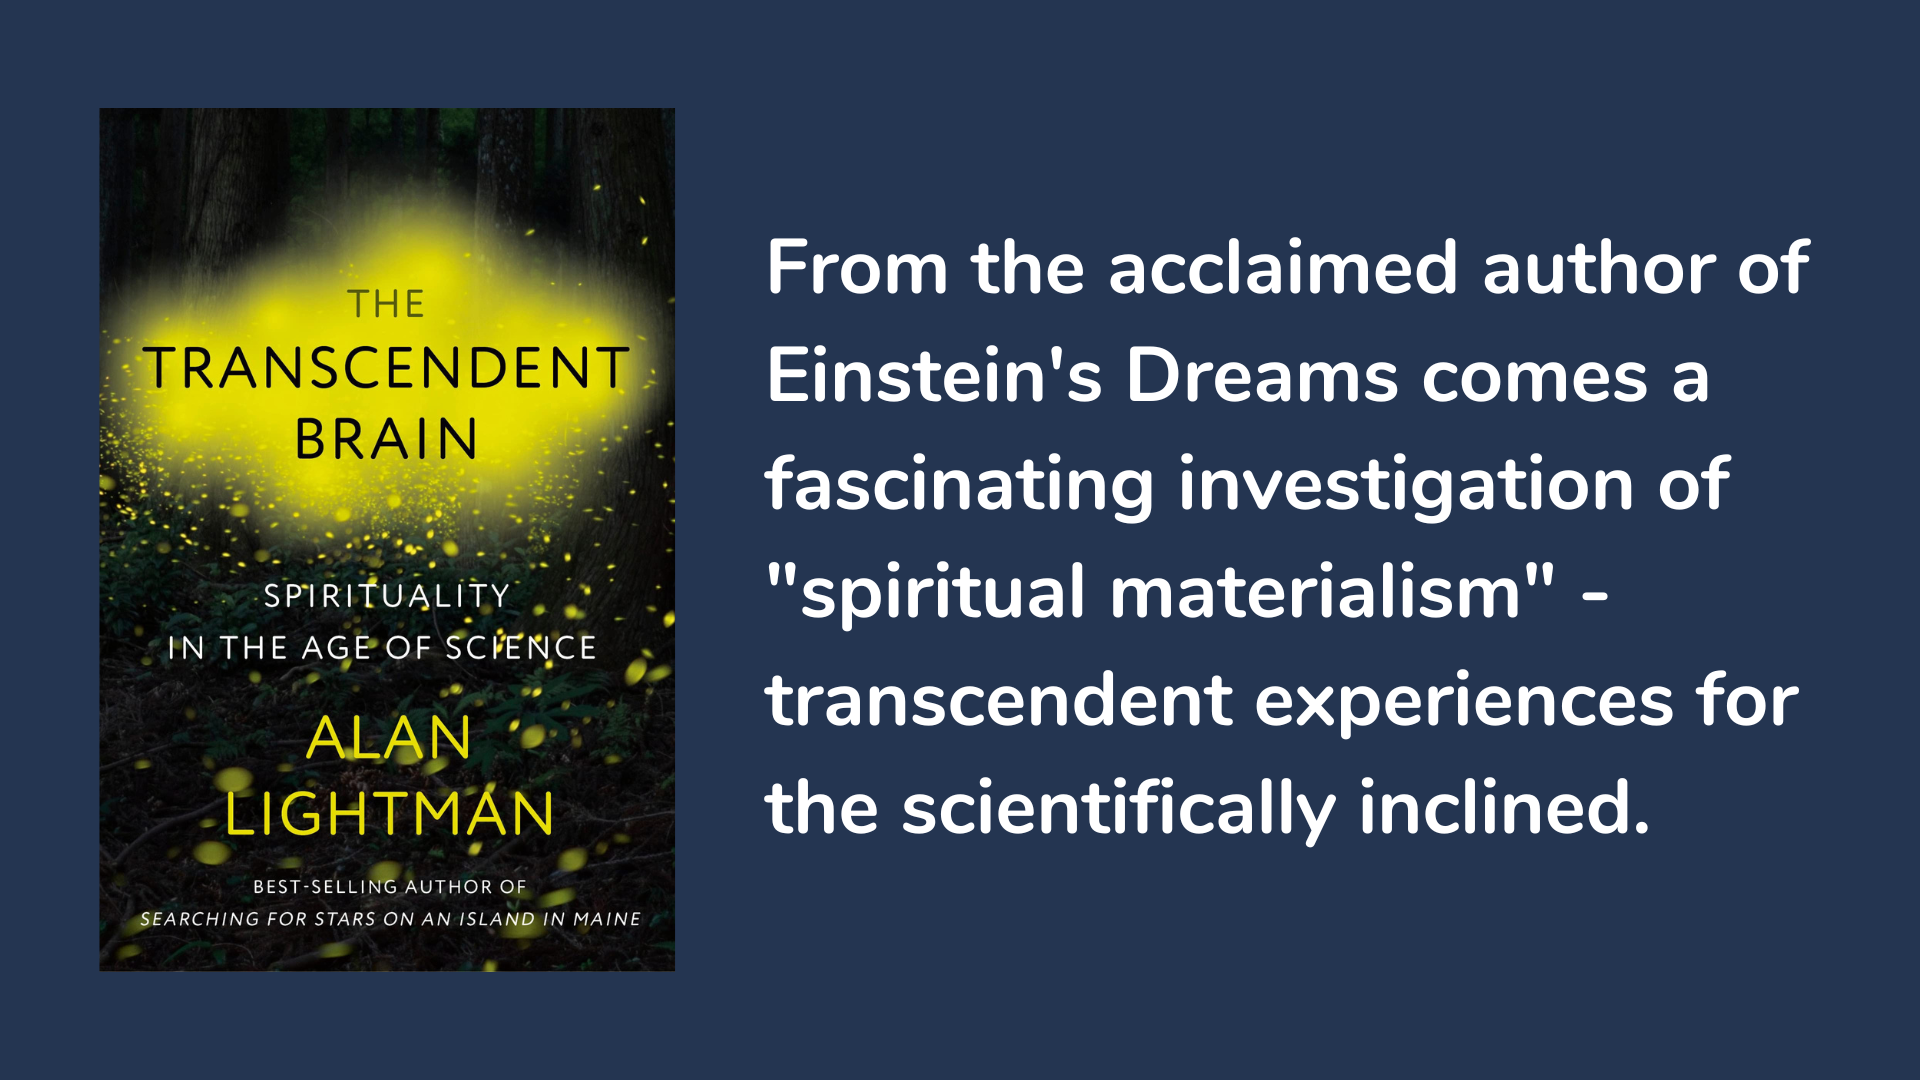 The Transcendent Brain: Spirituality in the Age of Science, book cover and description.